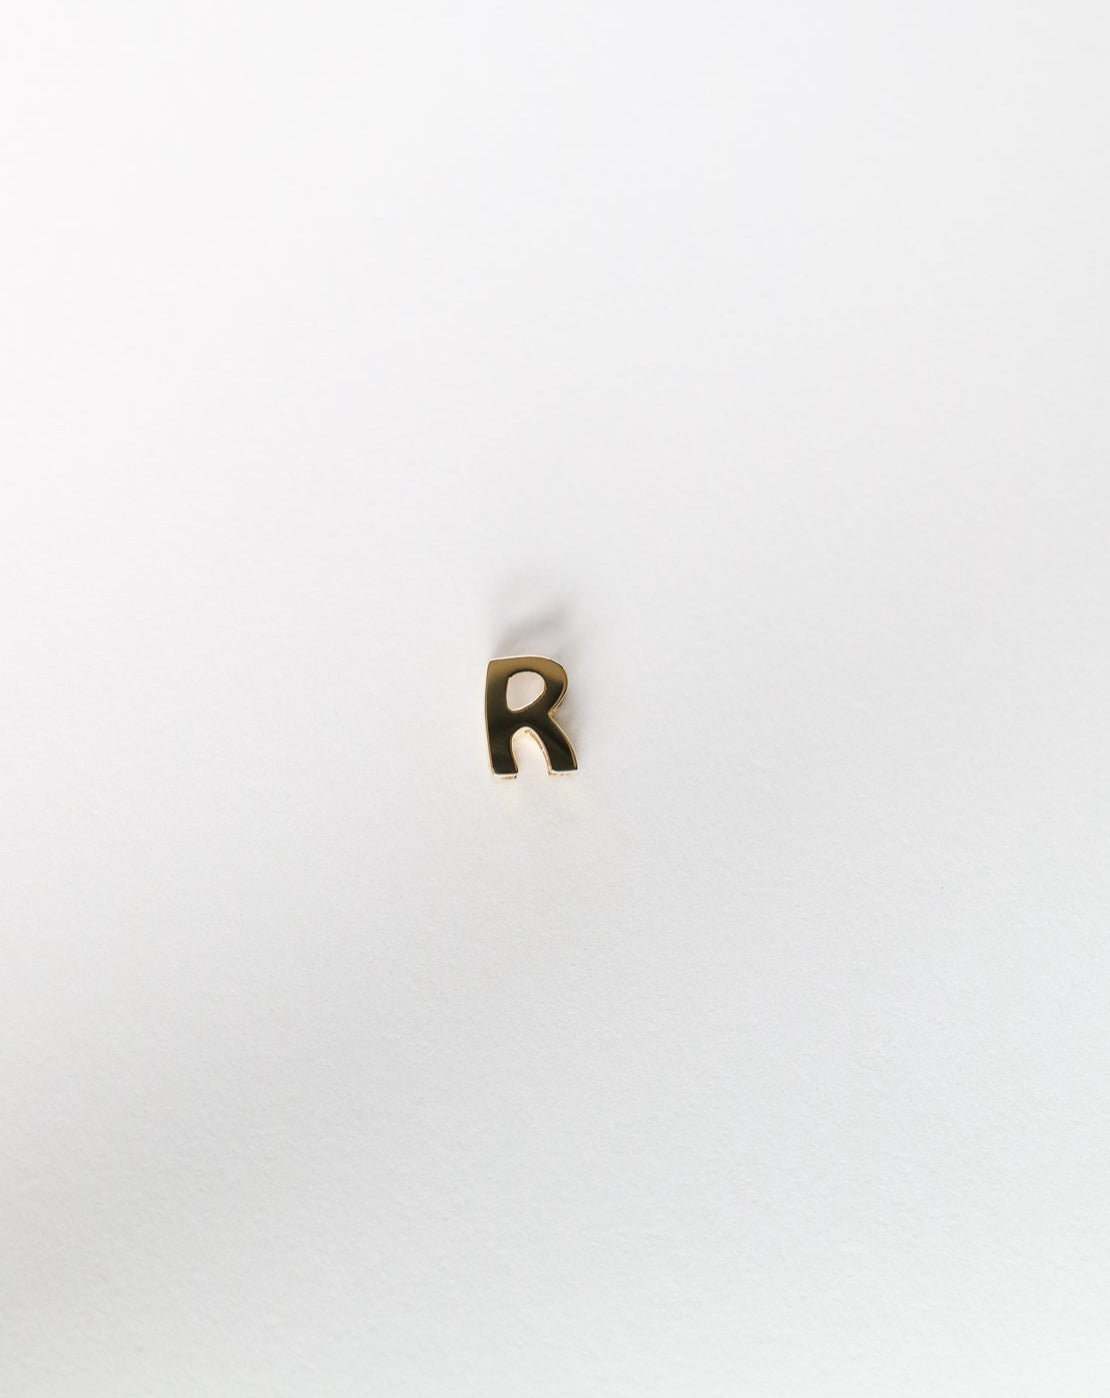 R initial charm letter pendant in 14kt gold